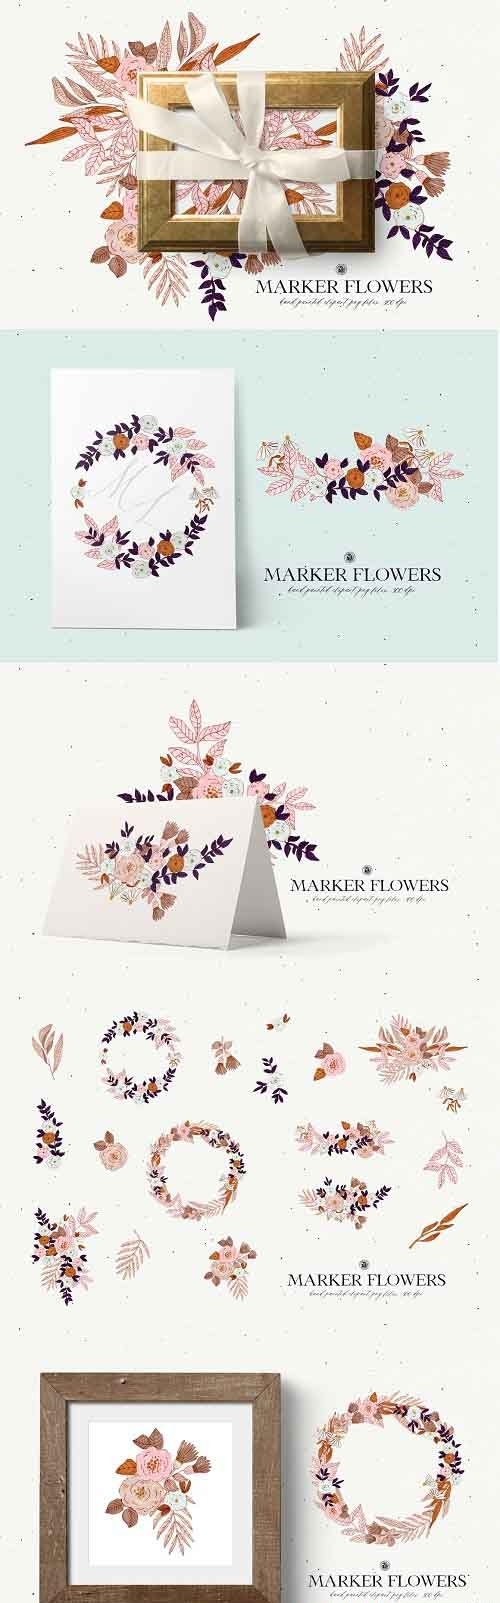 Marker Flowers - floral clipart - 5920393